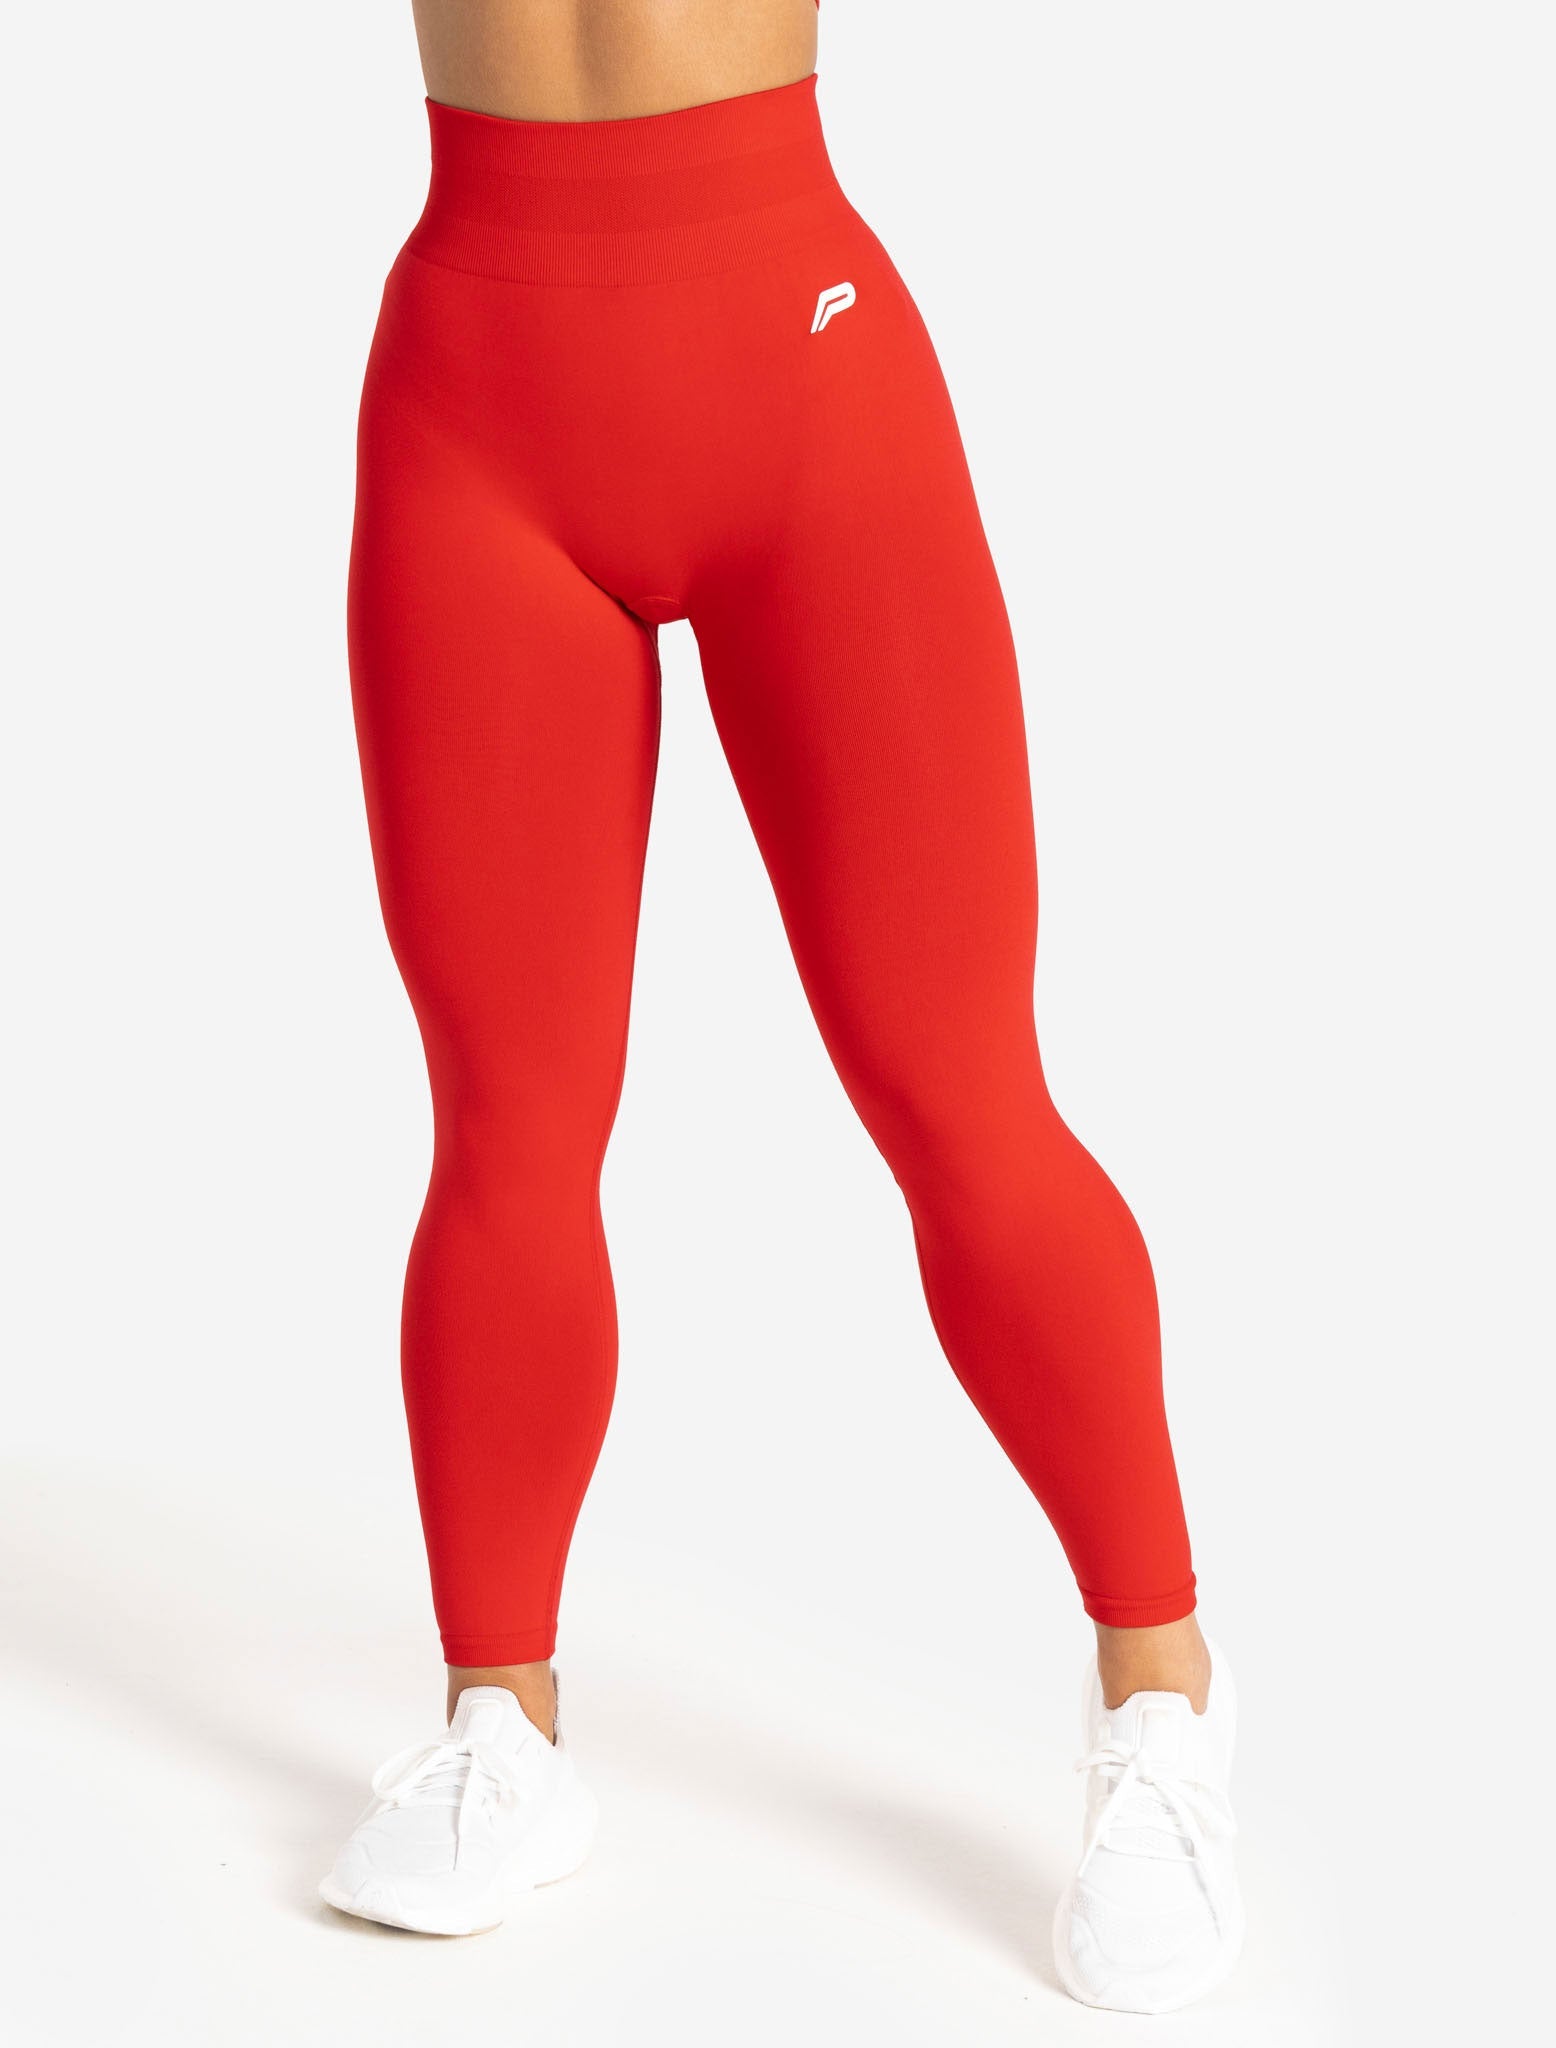 Candy Apple Red High Waisted Leggings – BoldBody Active